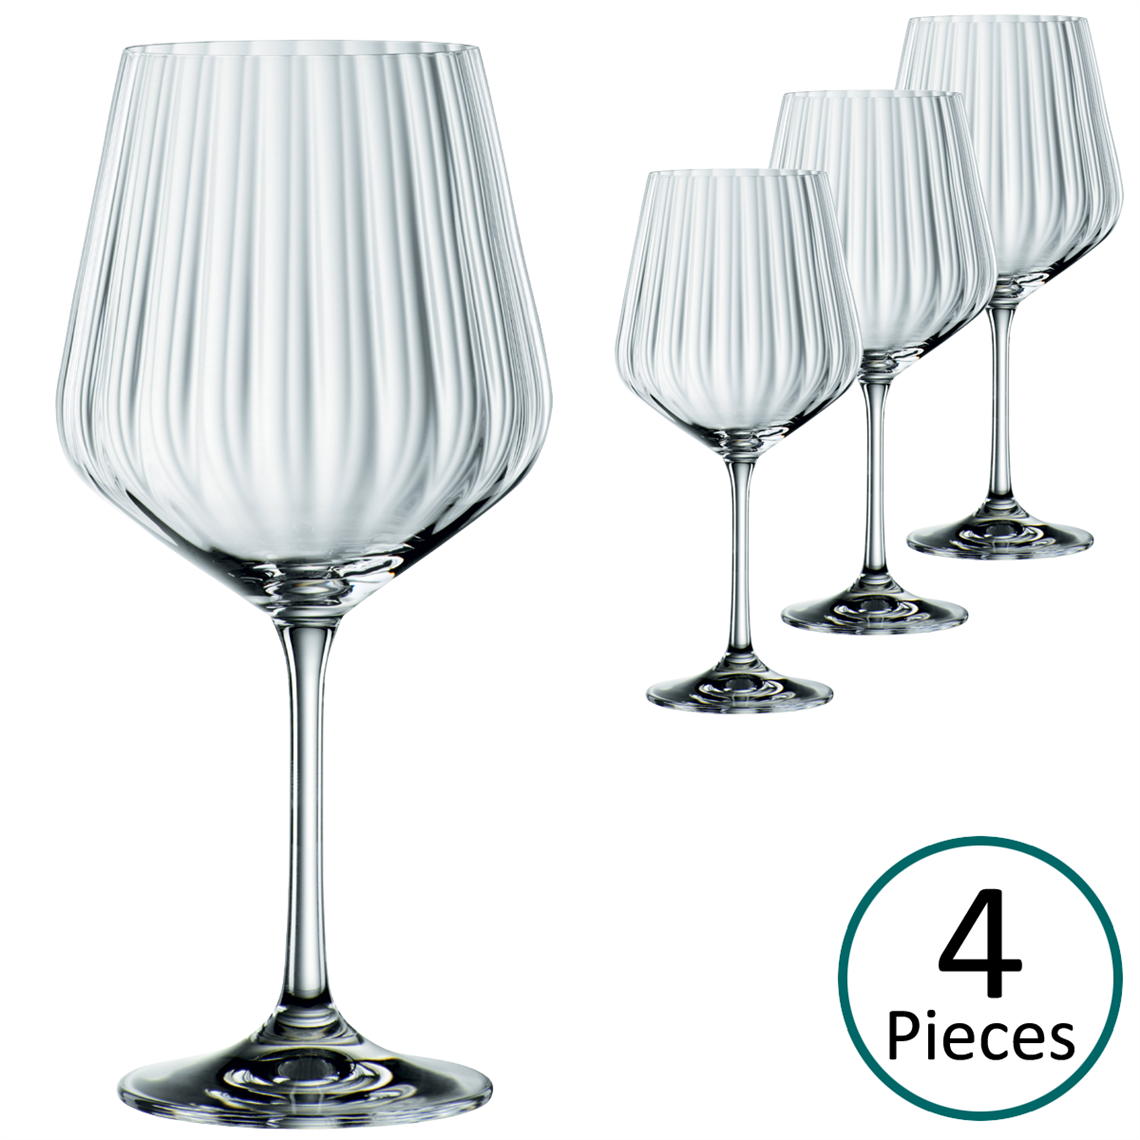 Nachtmann Gin and Tonic / Copa Glass - Set of 4